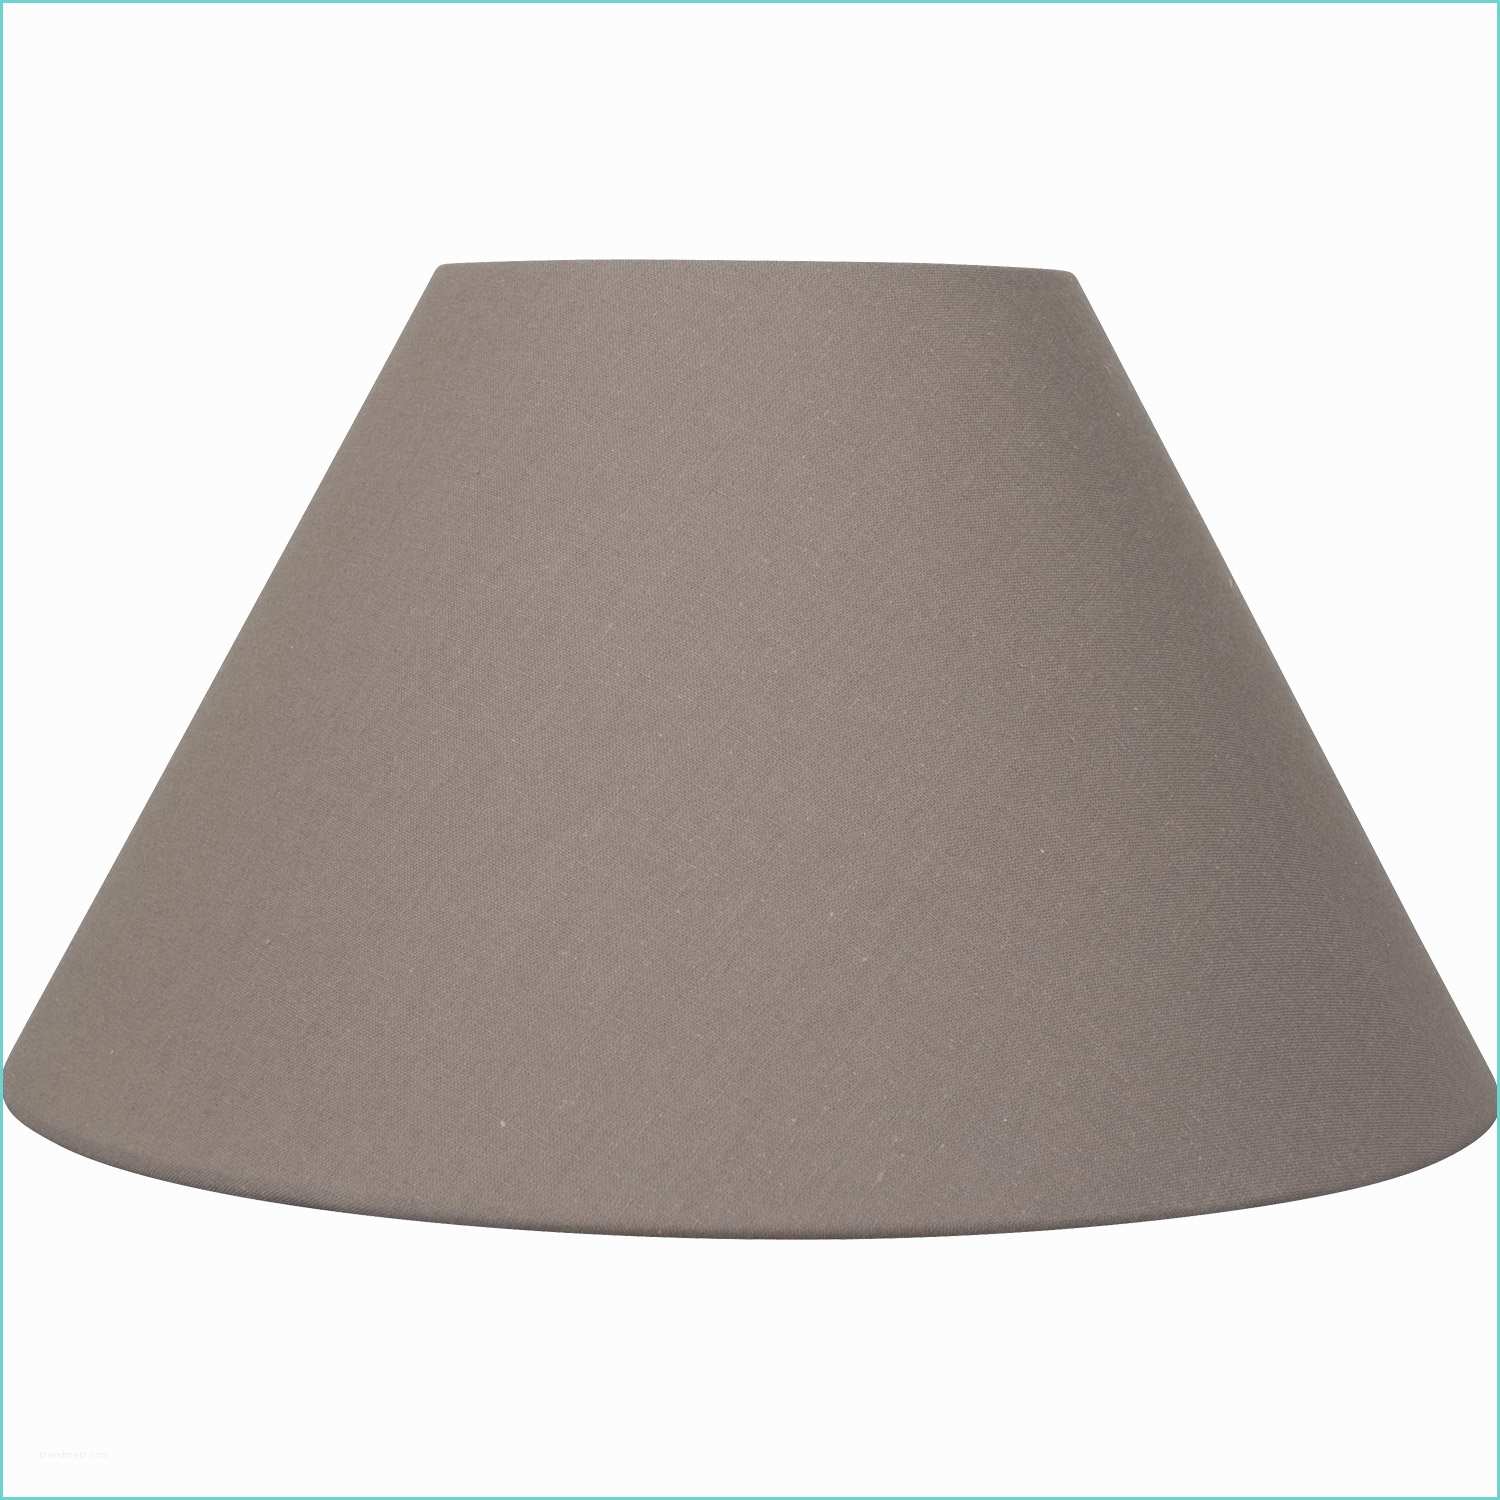 Piege A Taupe Leroy Merlin Abat Jour Sweet 50 Cm toiline Brun Taupe N°3 Inspire